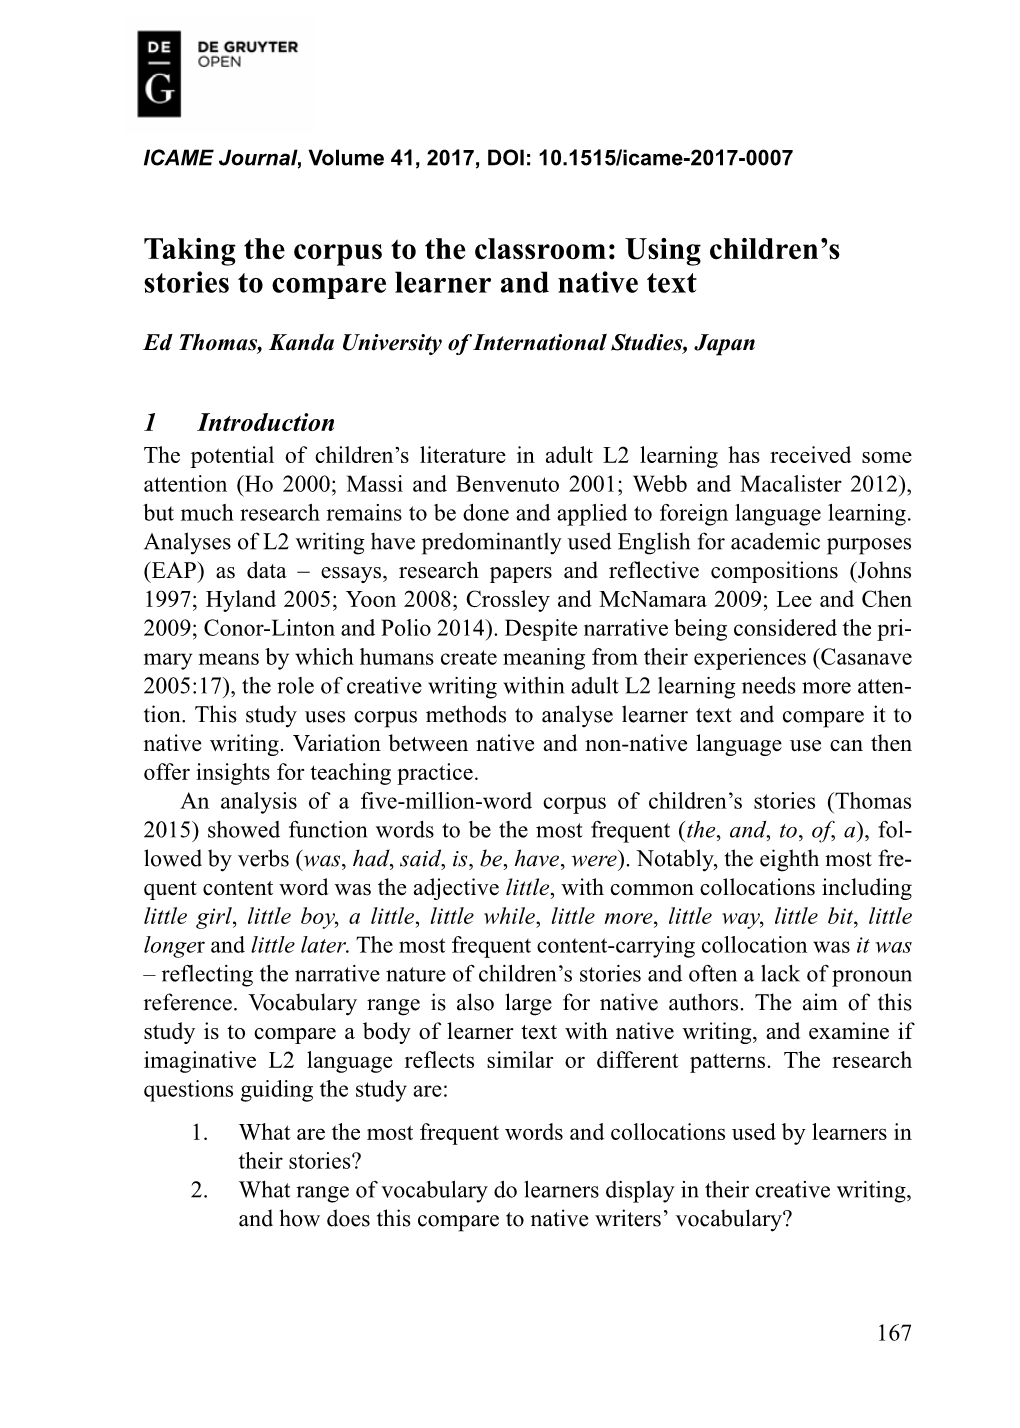 Taking the Corpus to the Classroom: Using Children's Stories to Compare Learner and Native Text